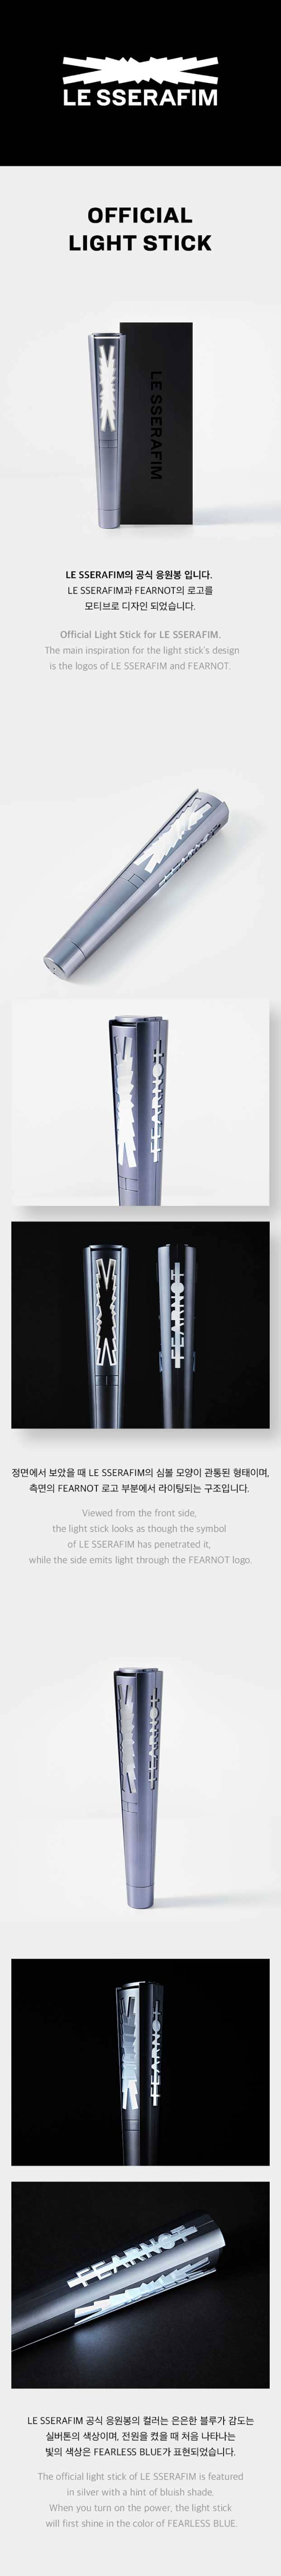 LE SSERAFIM - Official Light Stick – Maycore Collection Ltd.